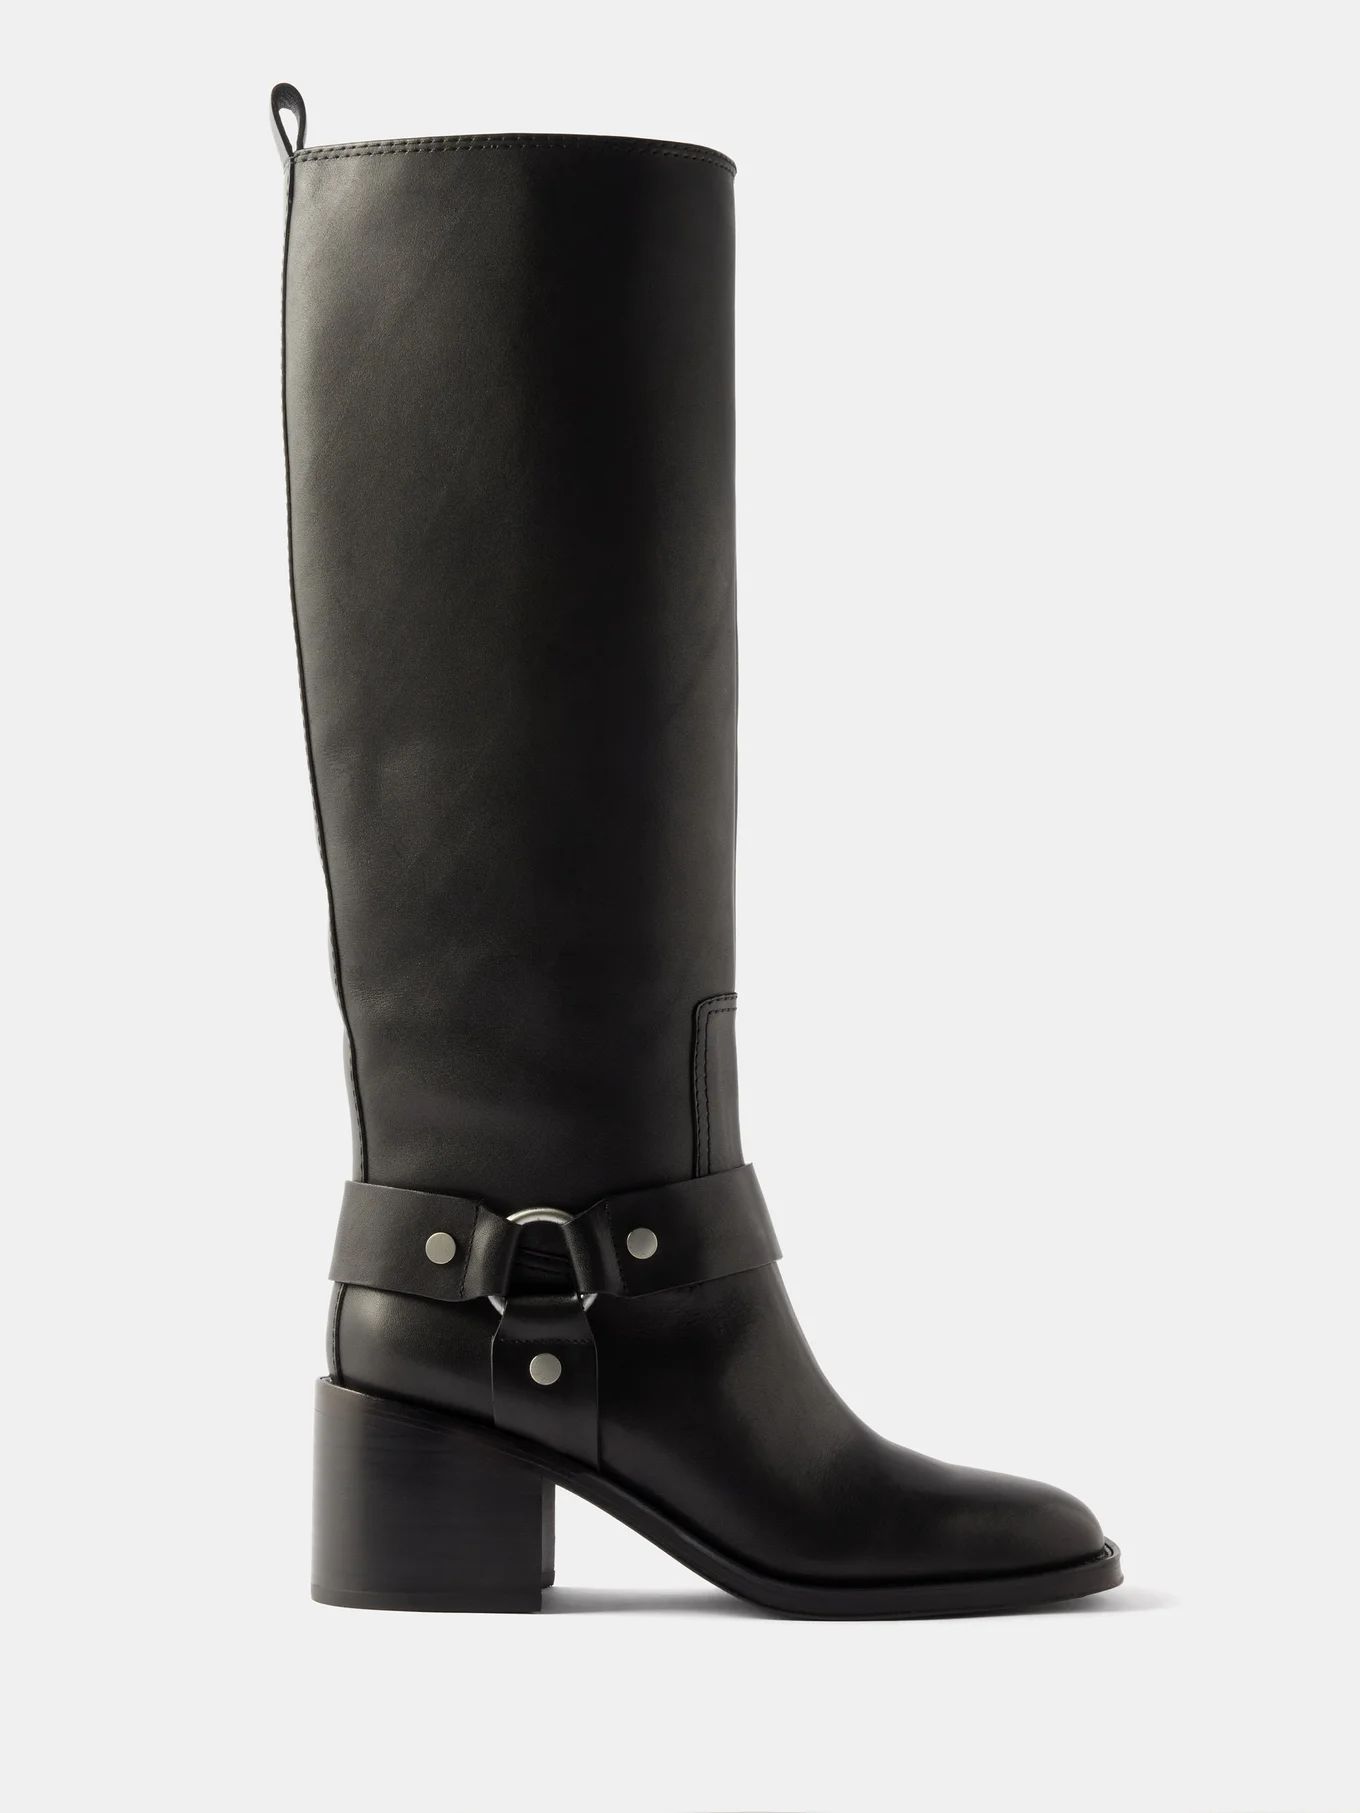 Audrey 75 leather knee-high boots | Matches (US)